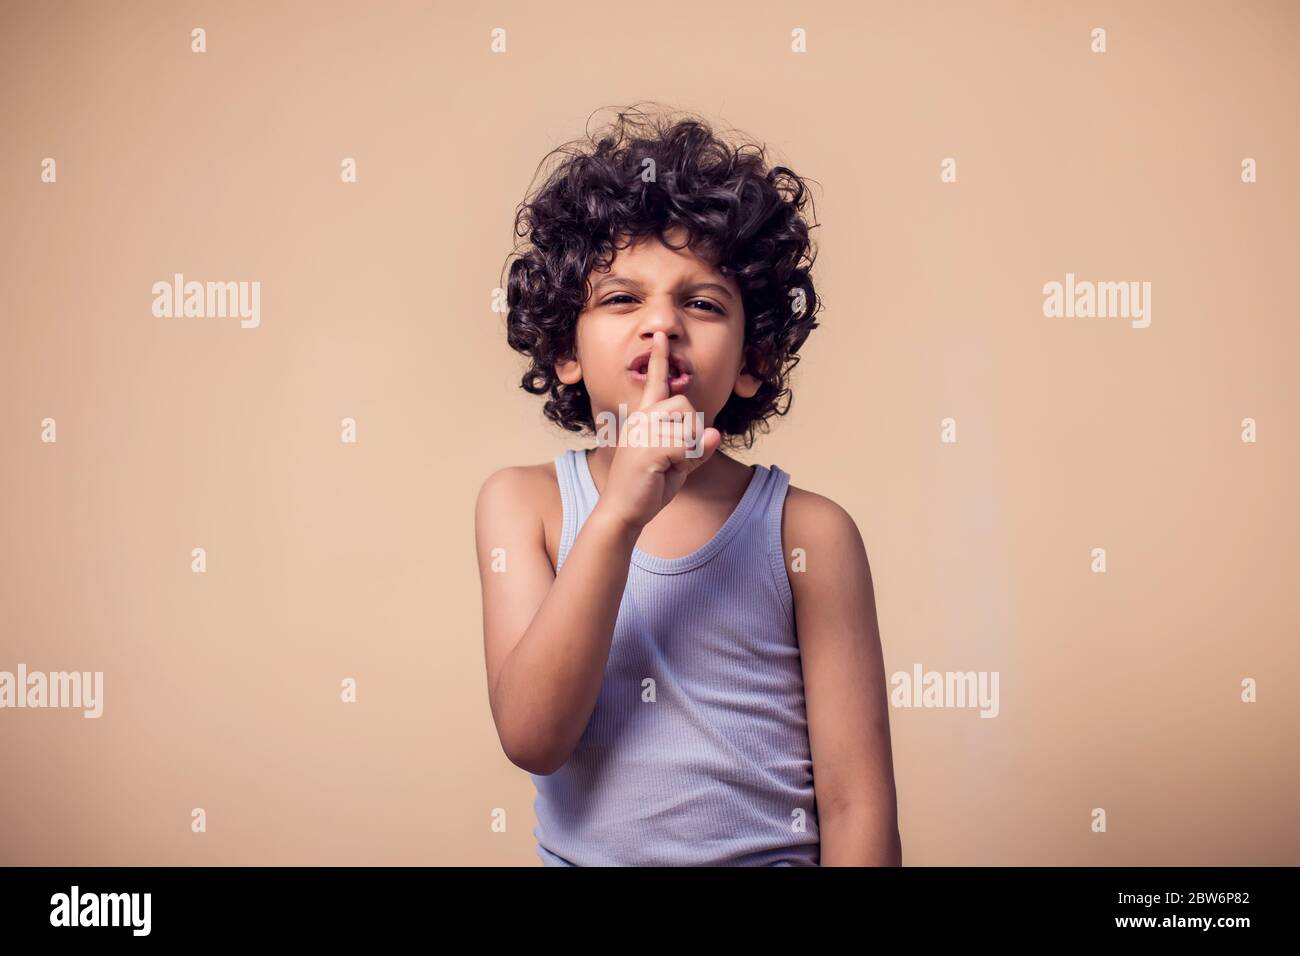 A portrait of kid boy with curly hair showing secret gesture. Children and emotions concept Stock Photo